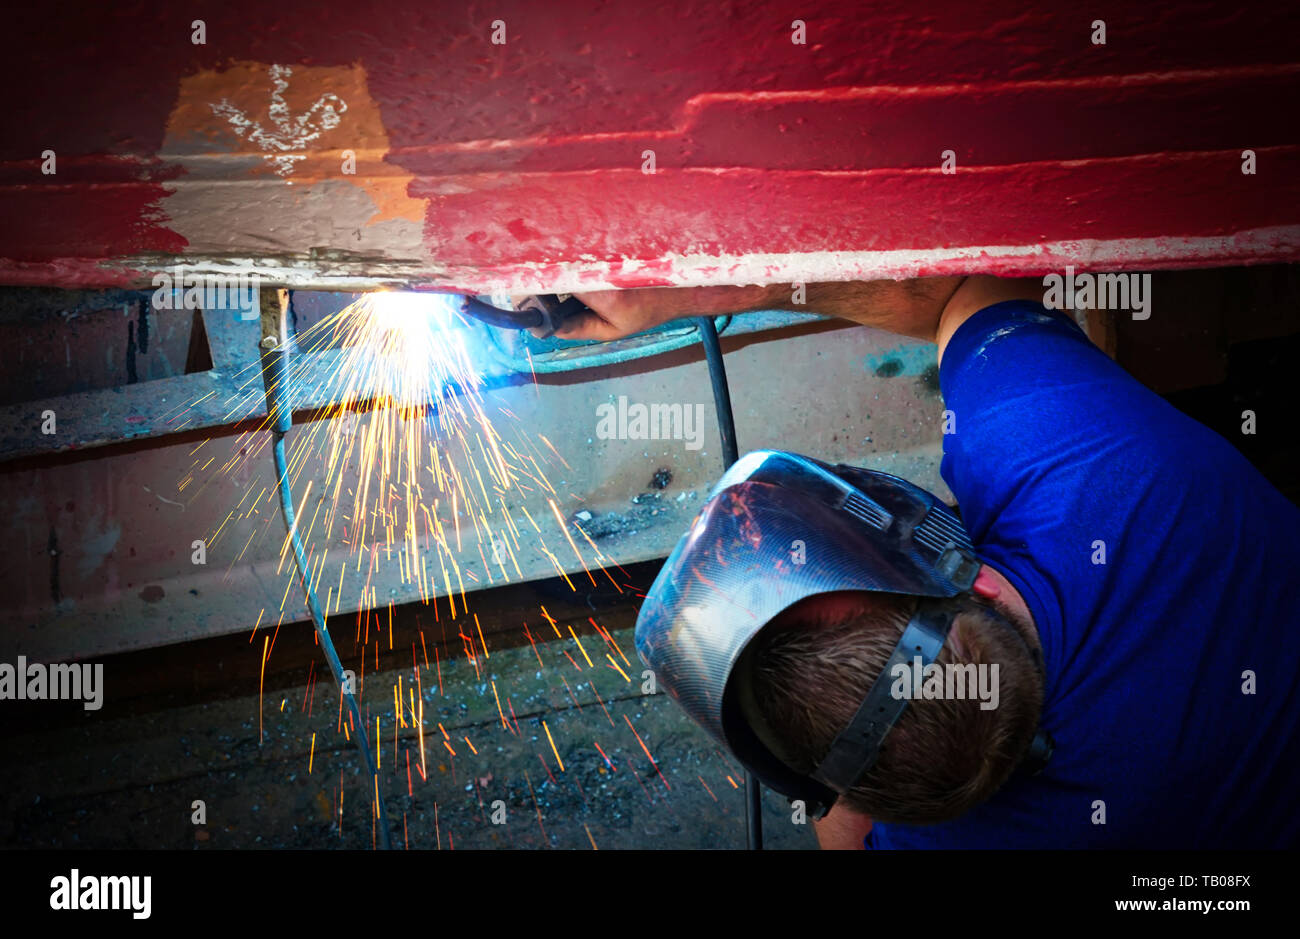 Young man welding something on the boat Stock Photo